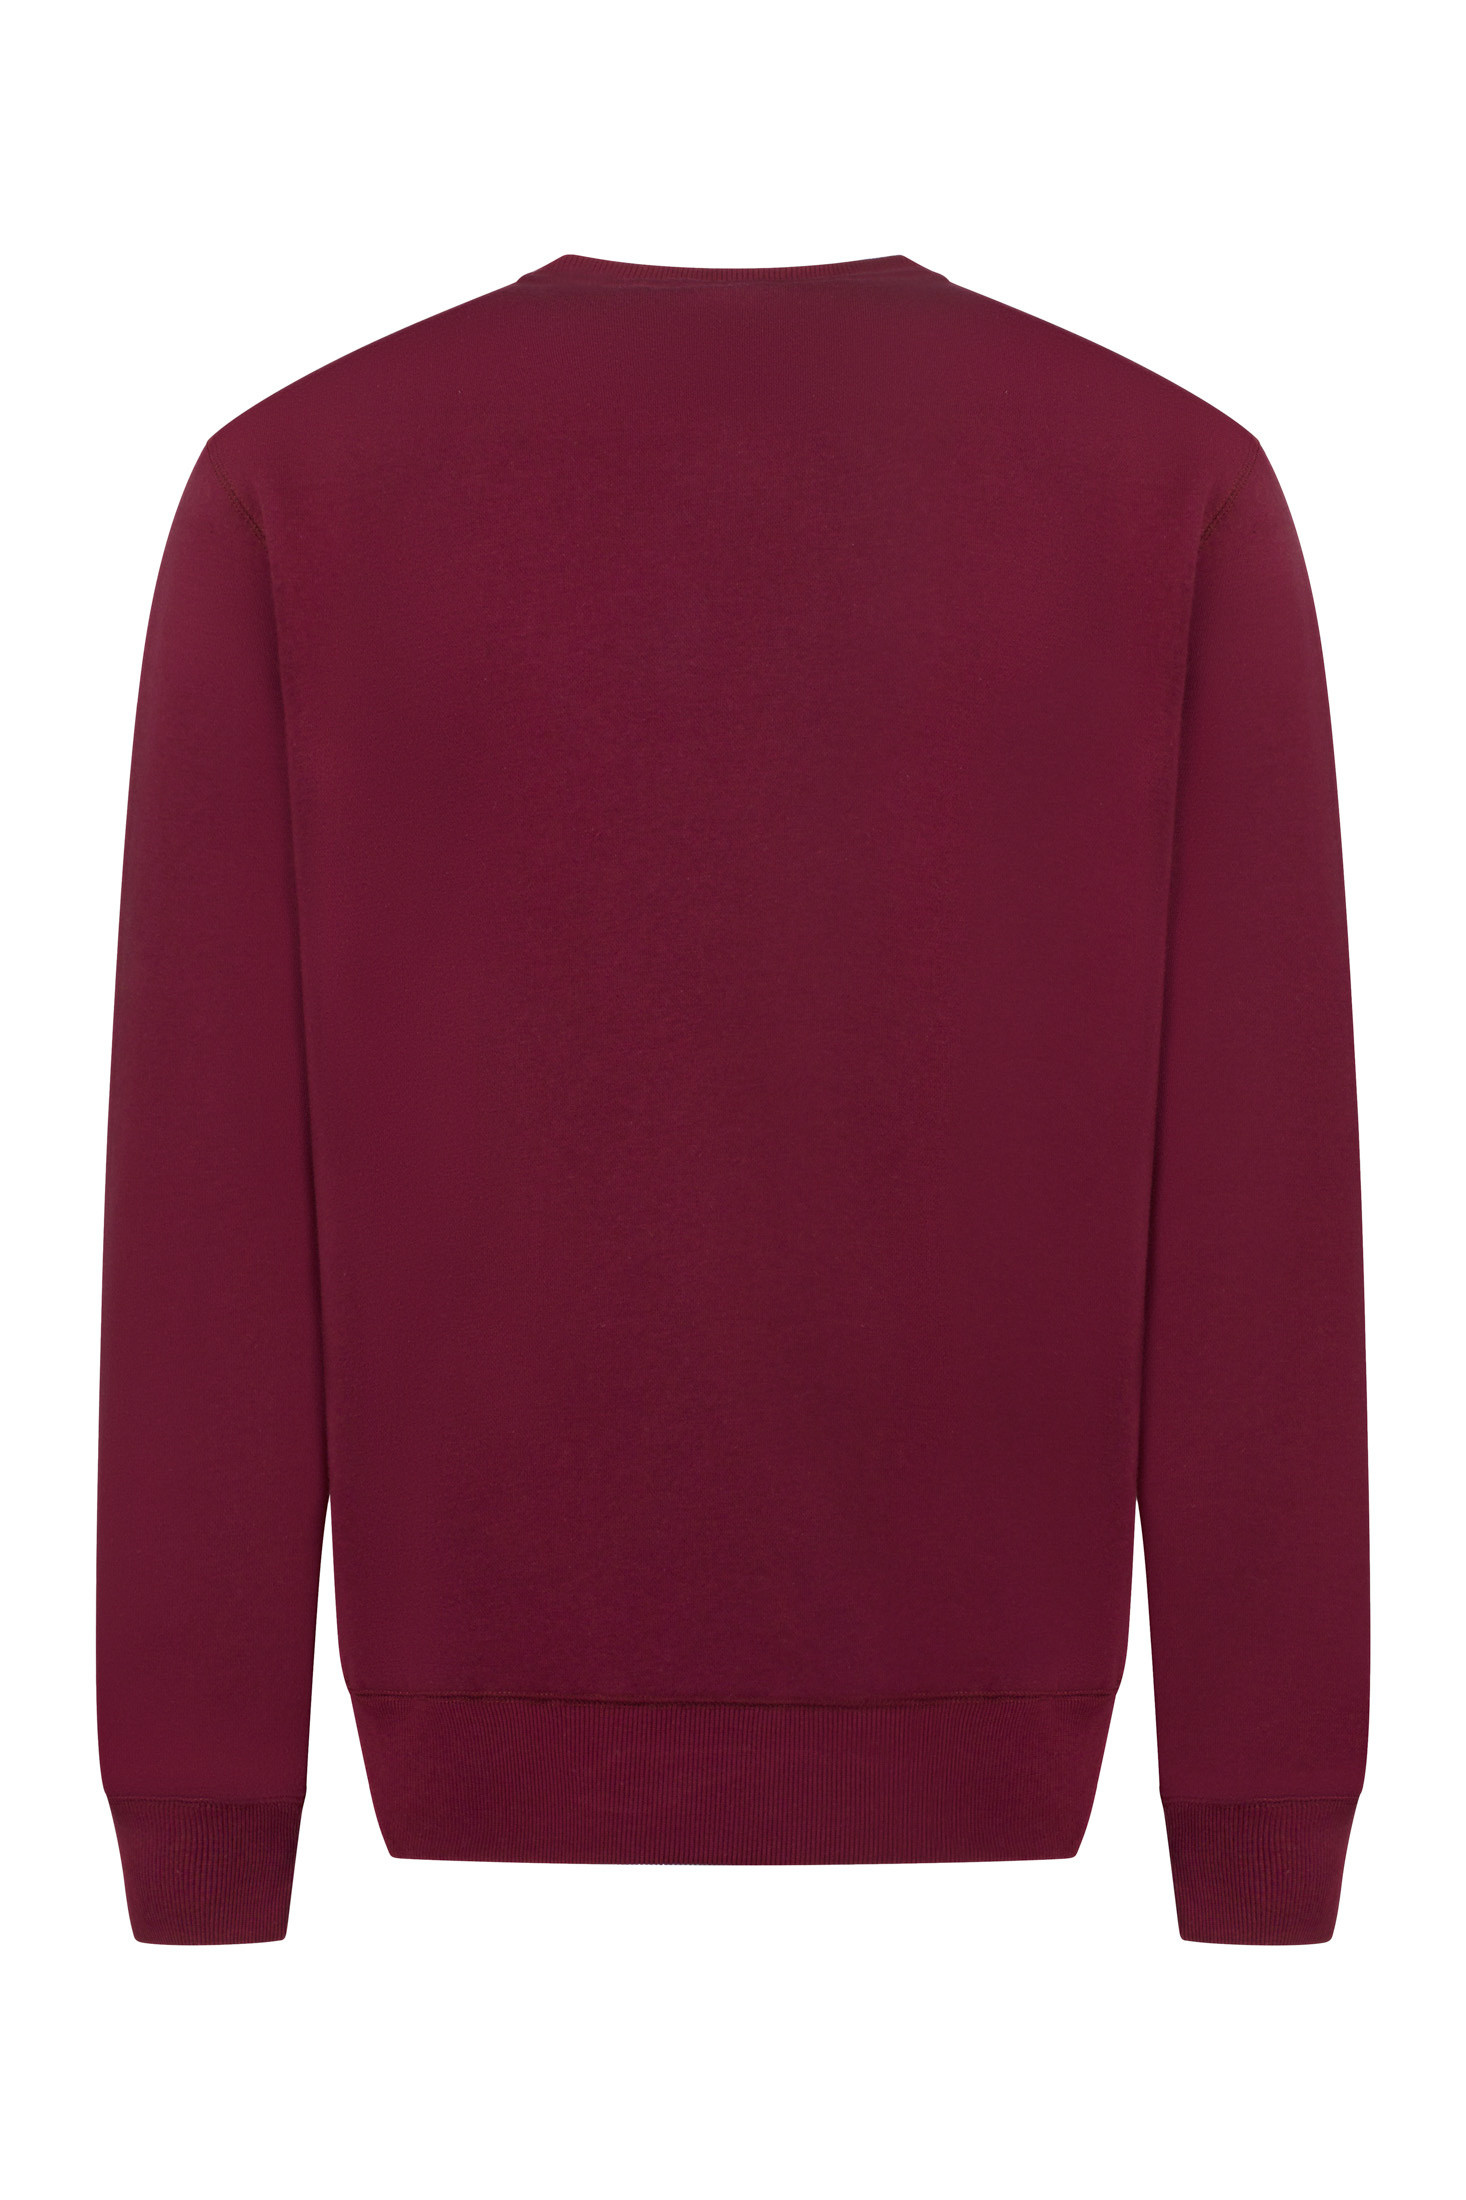 Russell Athletic - Sweatshirt with embroidery, Red Bordeaux, large image number 1